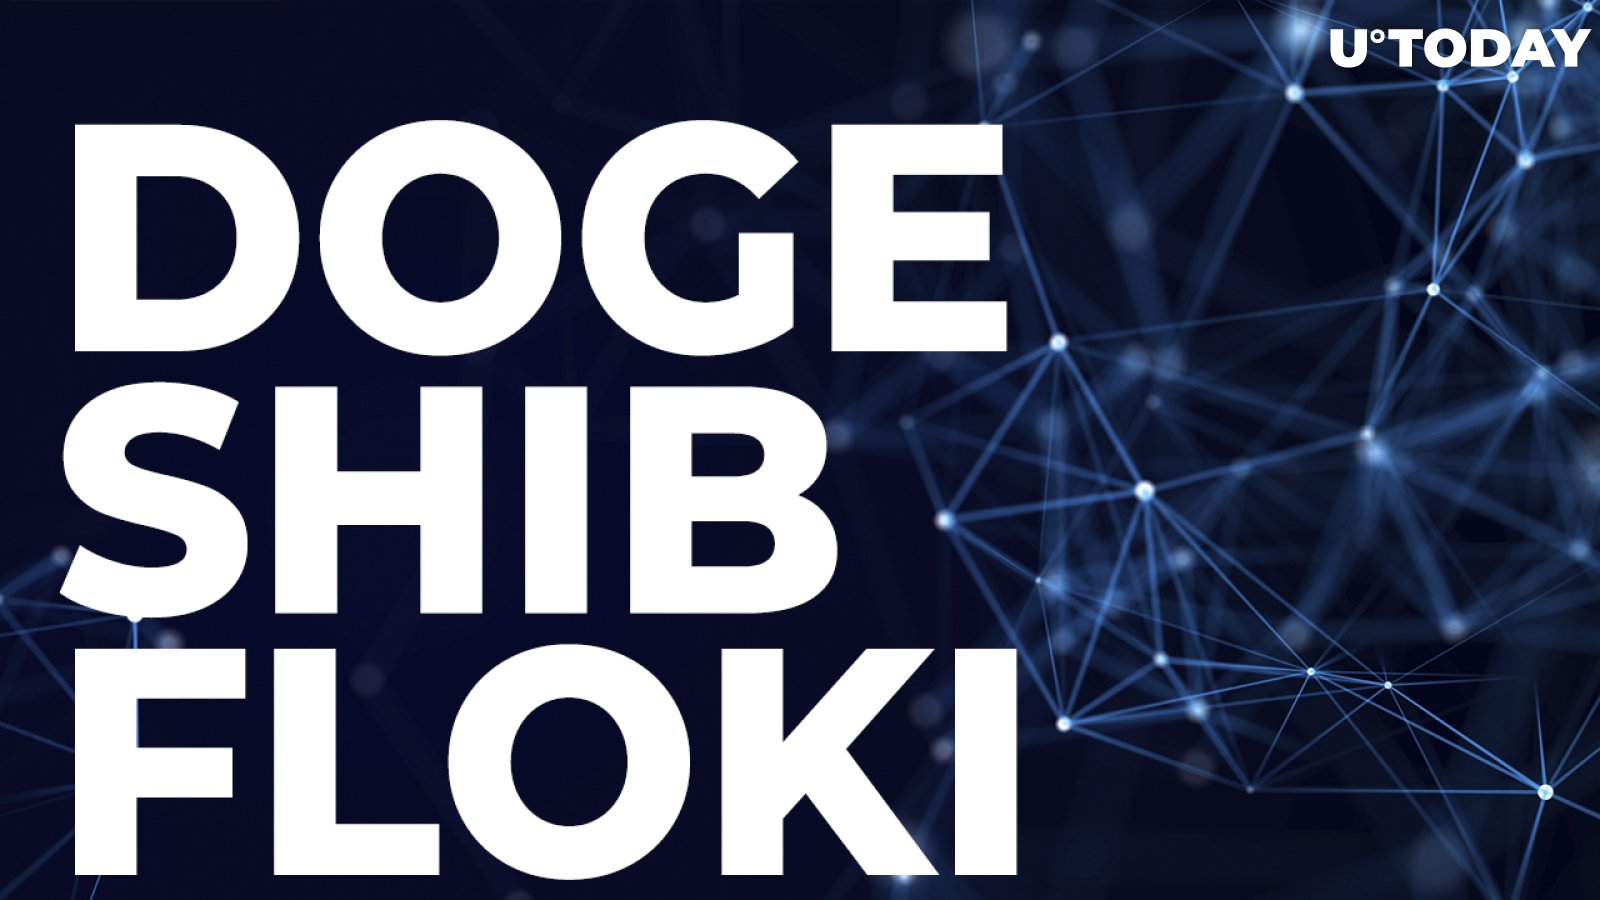 Here's Why DOGE, SHIB and FLOKI Are Important for Crypto Space, David Gokhshtein Believes